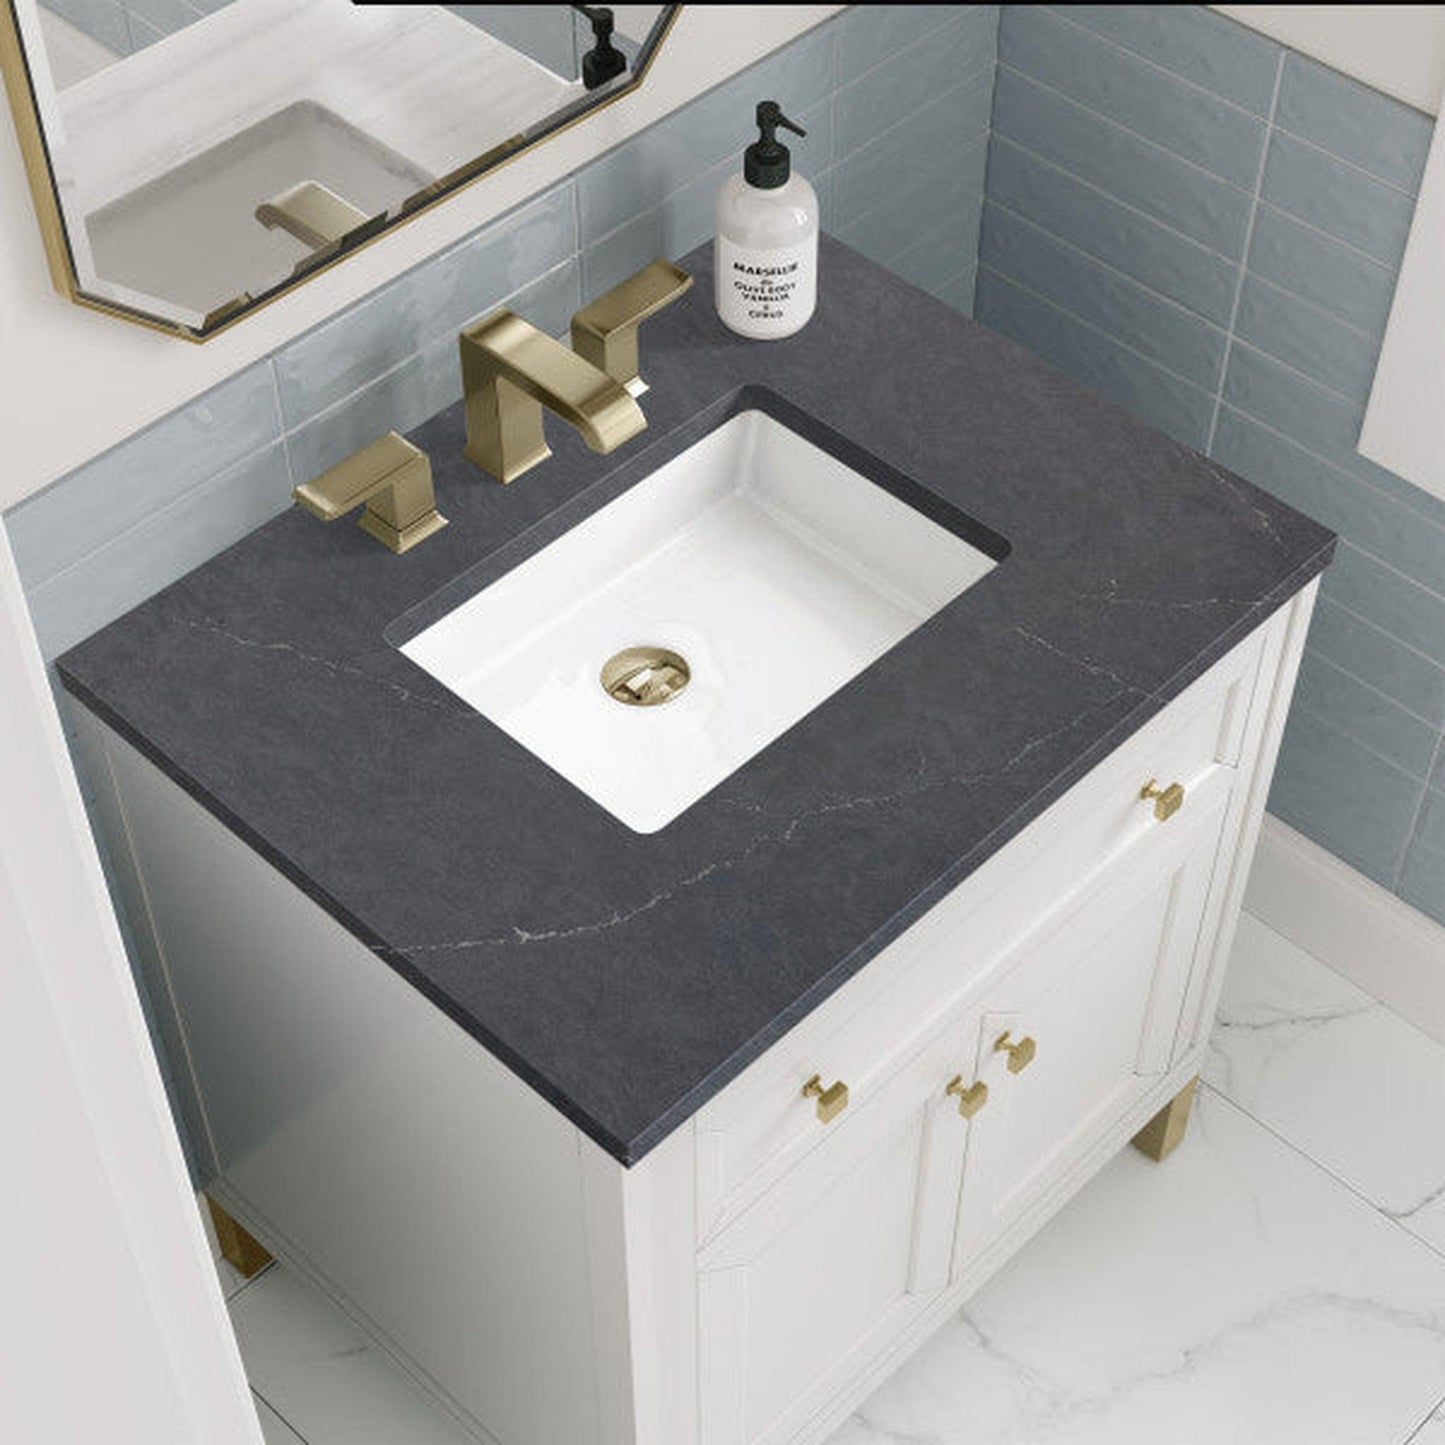 James Martin Vanities Chicago 30" Glossy White Single Vanity With 3cm Charcoal Soapstone Top